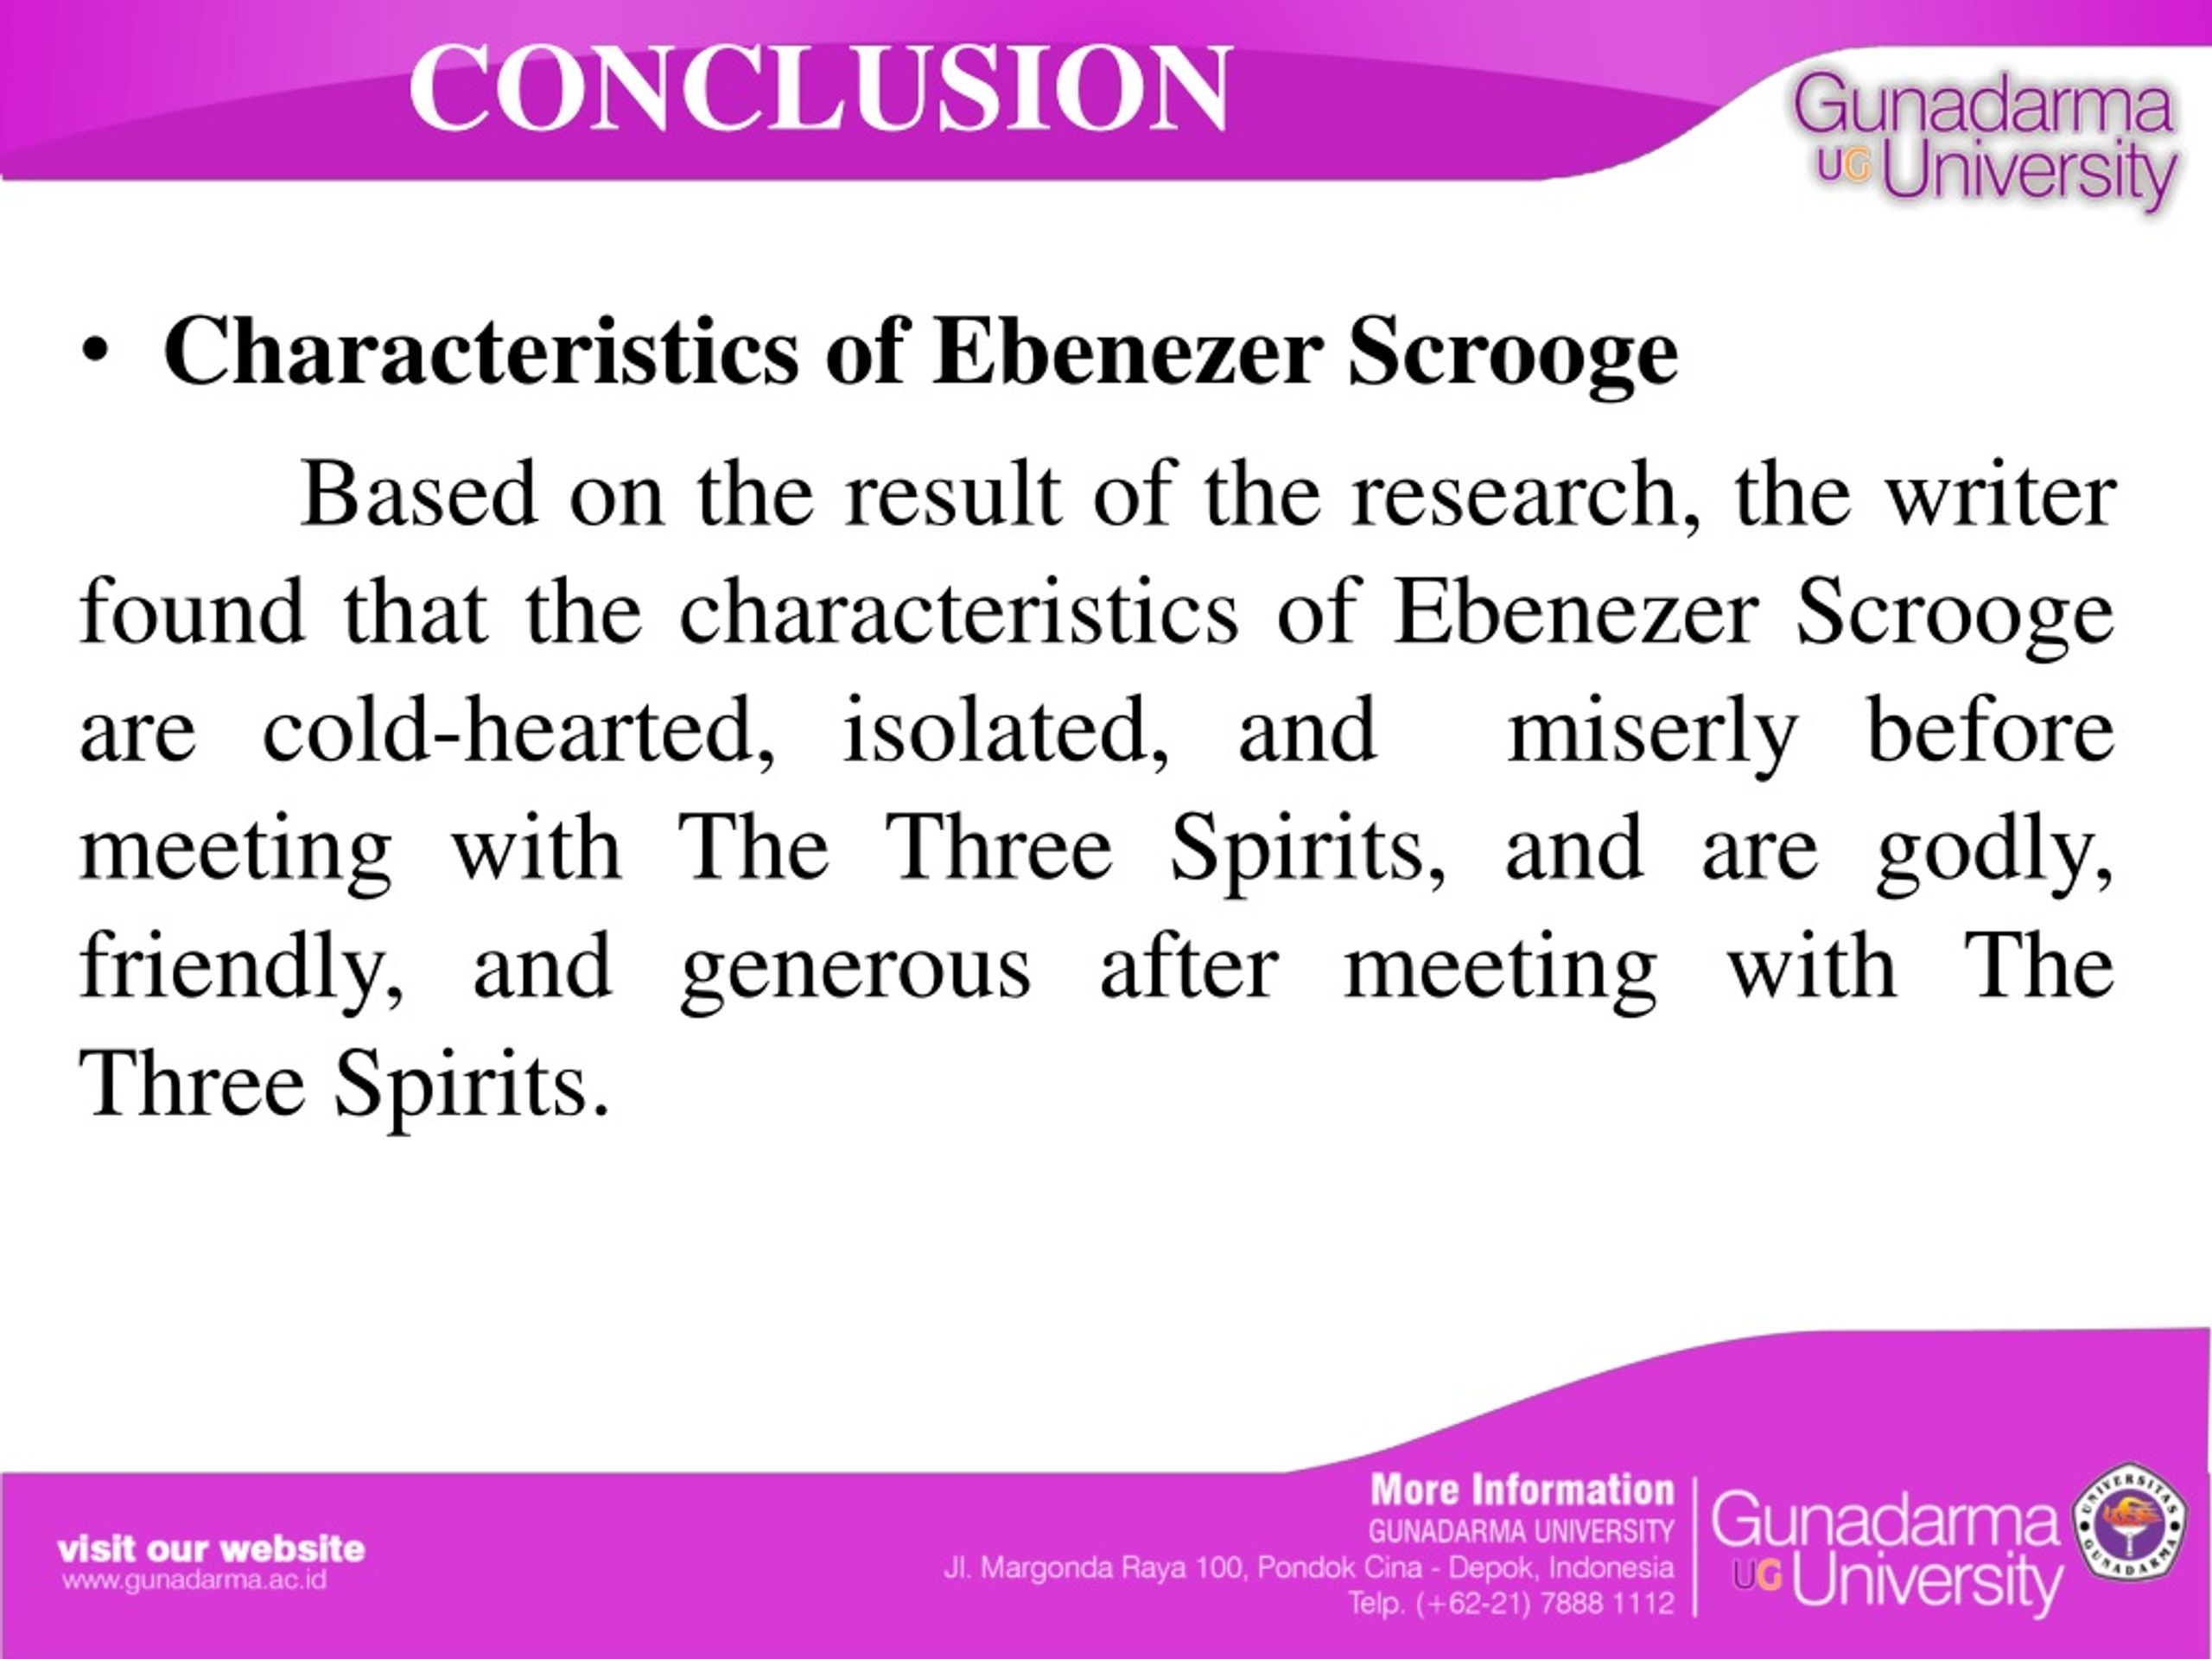 PPT - A Character Analysis on Ebenezer Scrooge in the Novel “A Christmas Carol” by Charles ...